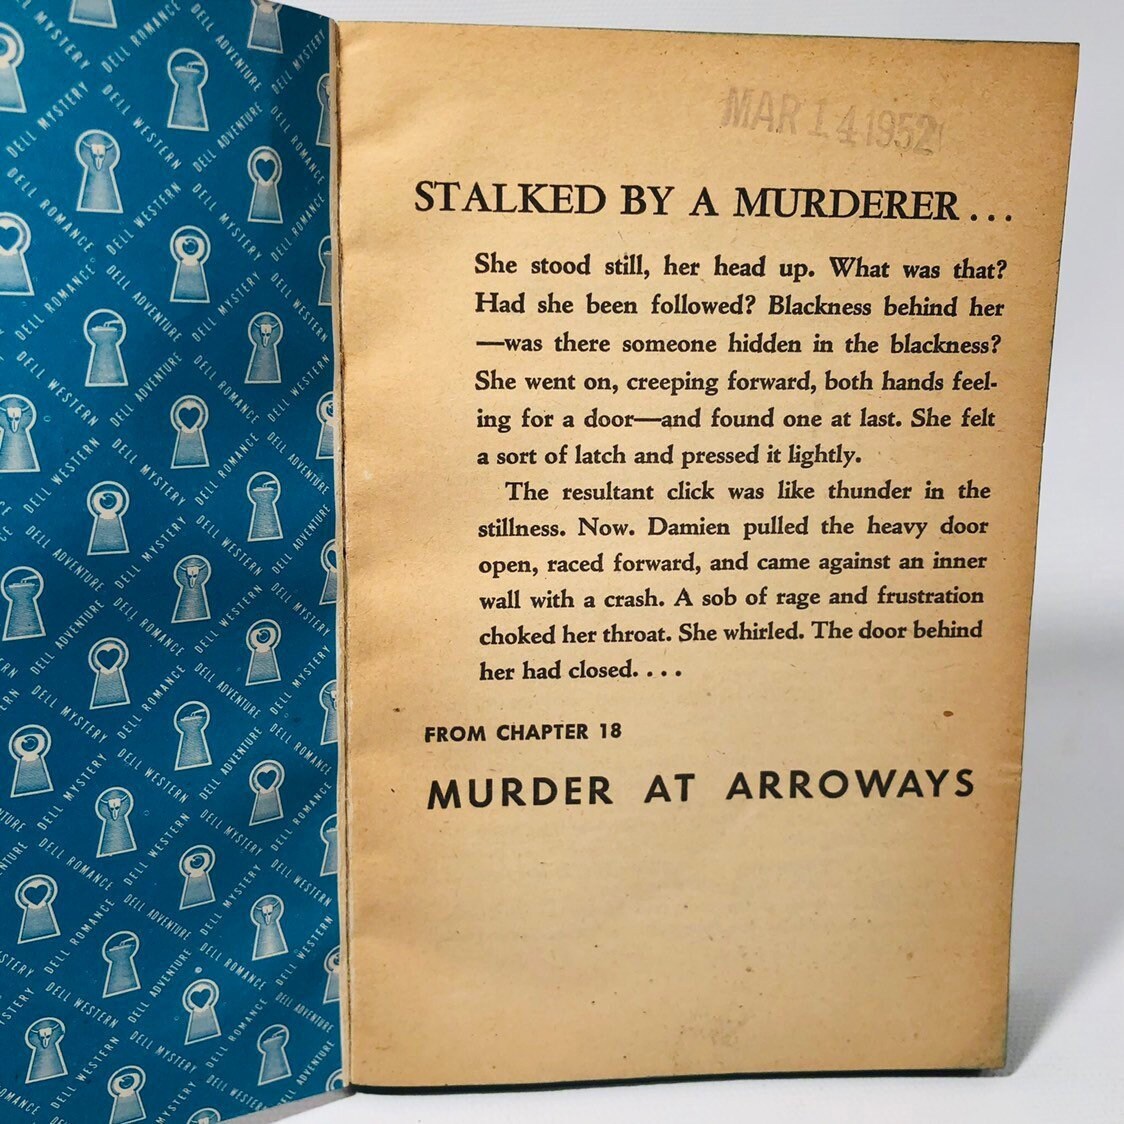 Vintage Paperbacks Murder at Arroways by Helen Reilly Cover Painting by Eddie Chan 1950 A Dell Book 576